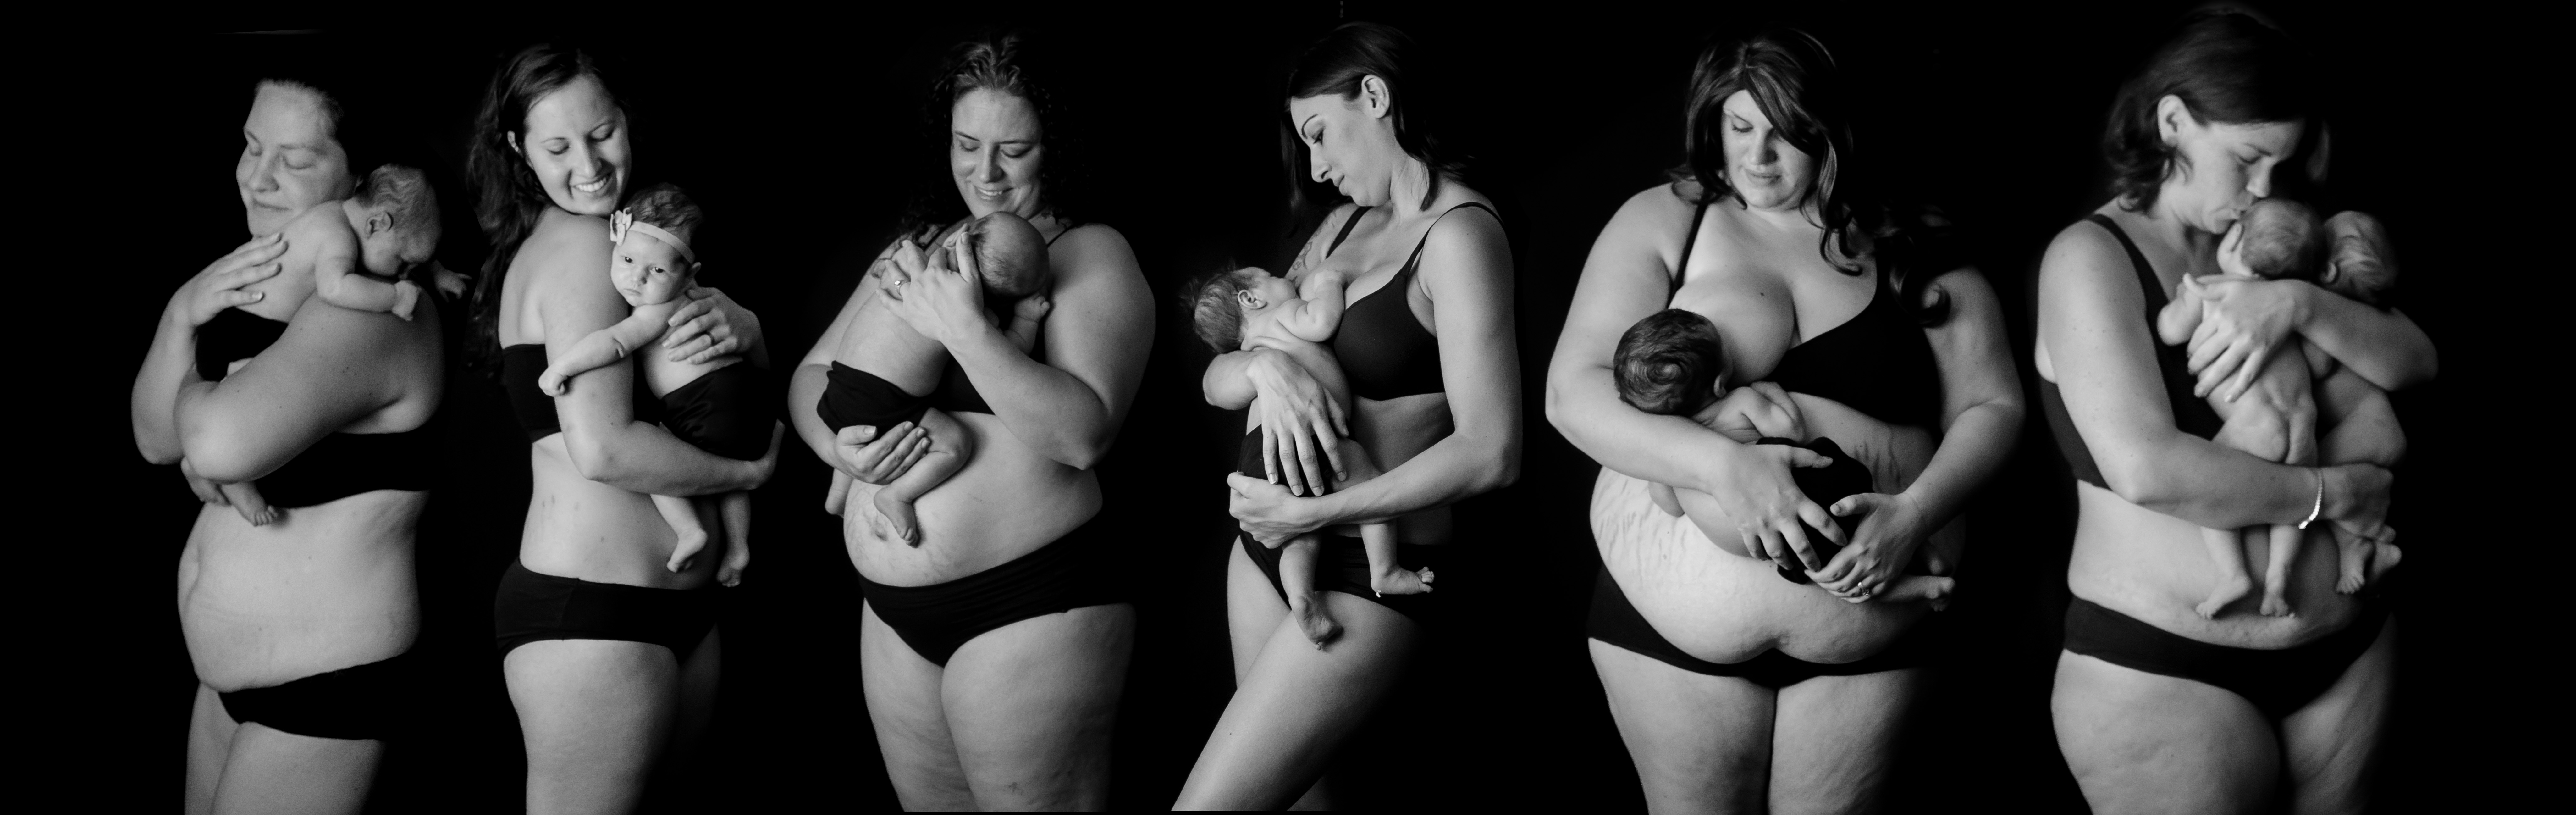 This is what REALLY happens to your body after you have a baby Three  women share their before and after pictures